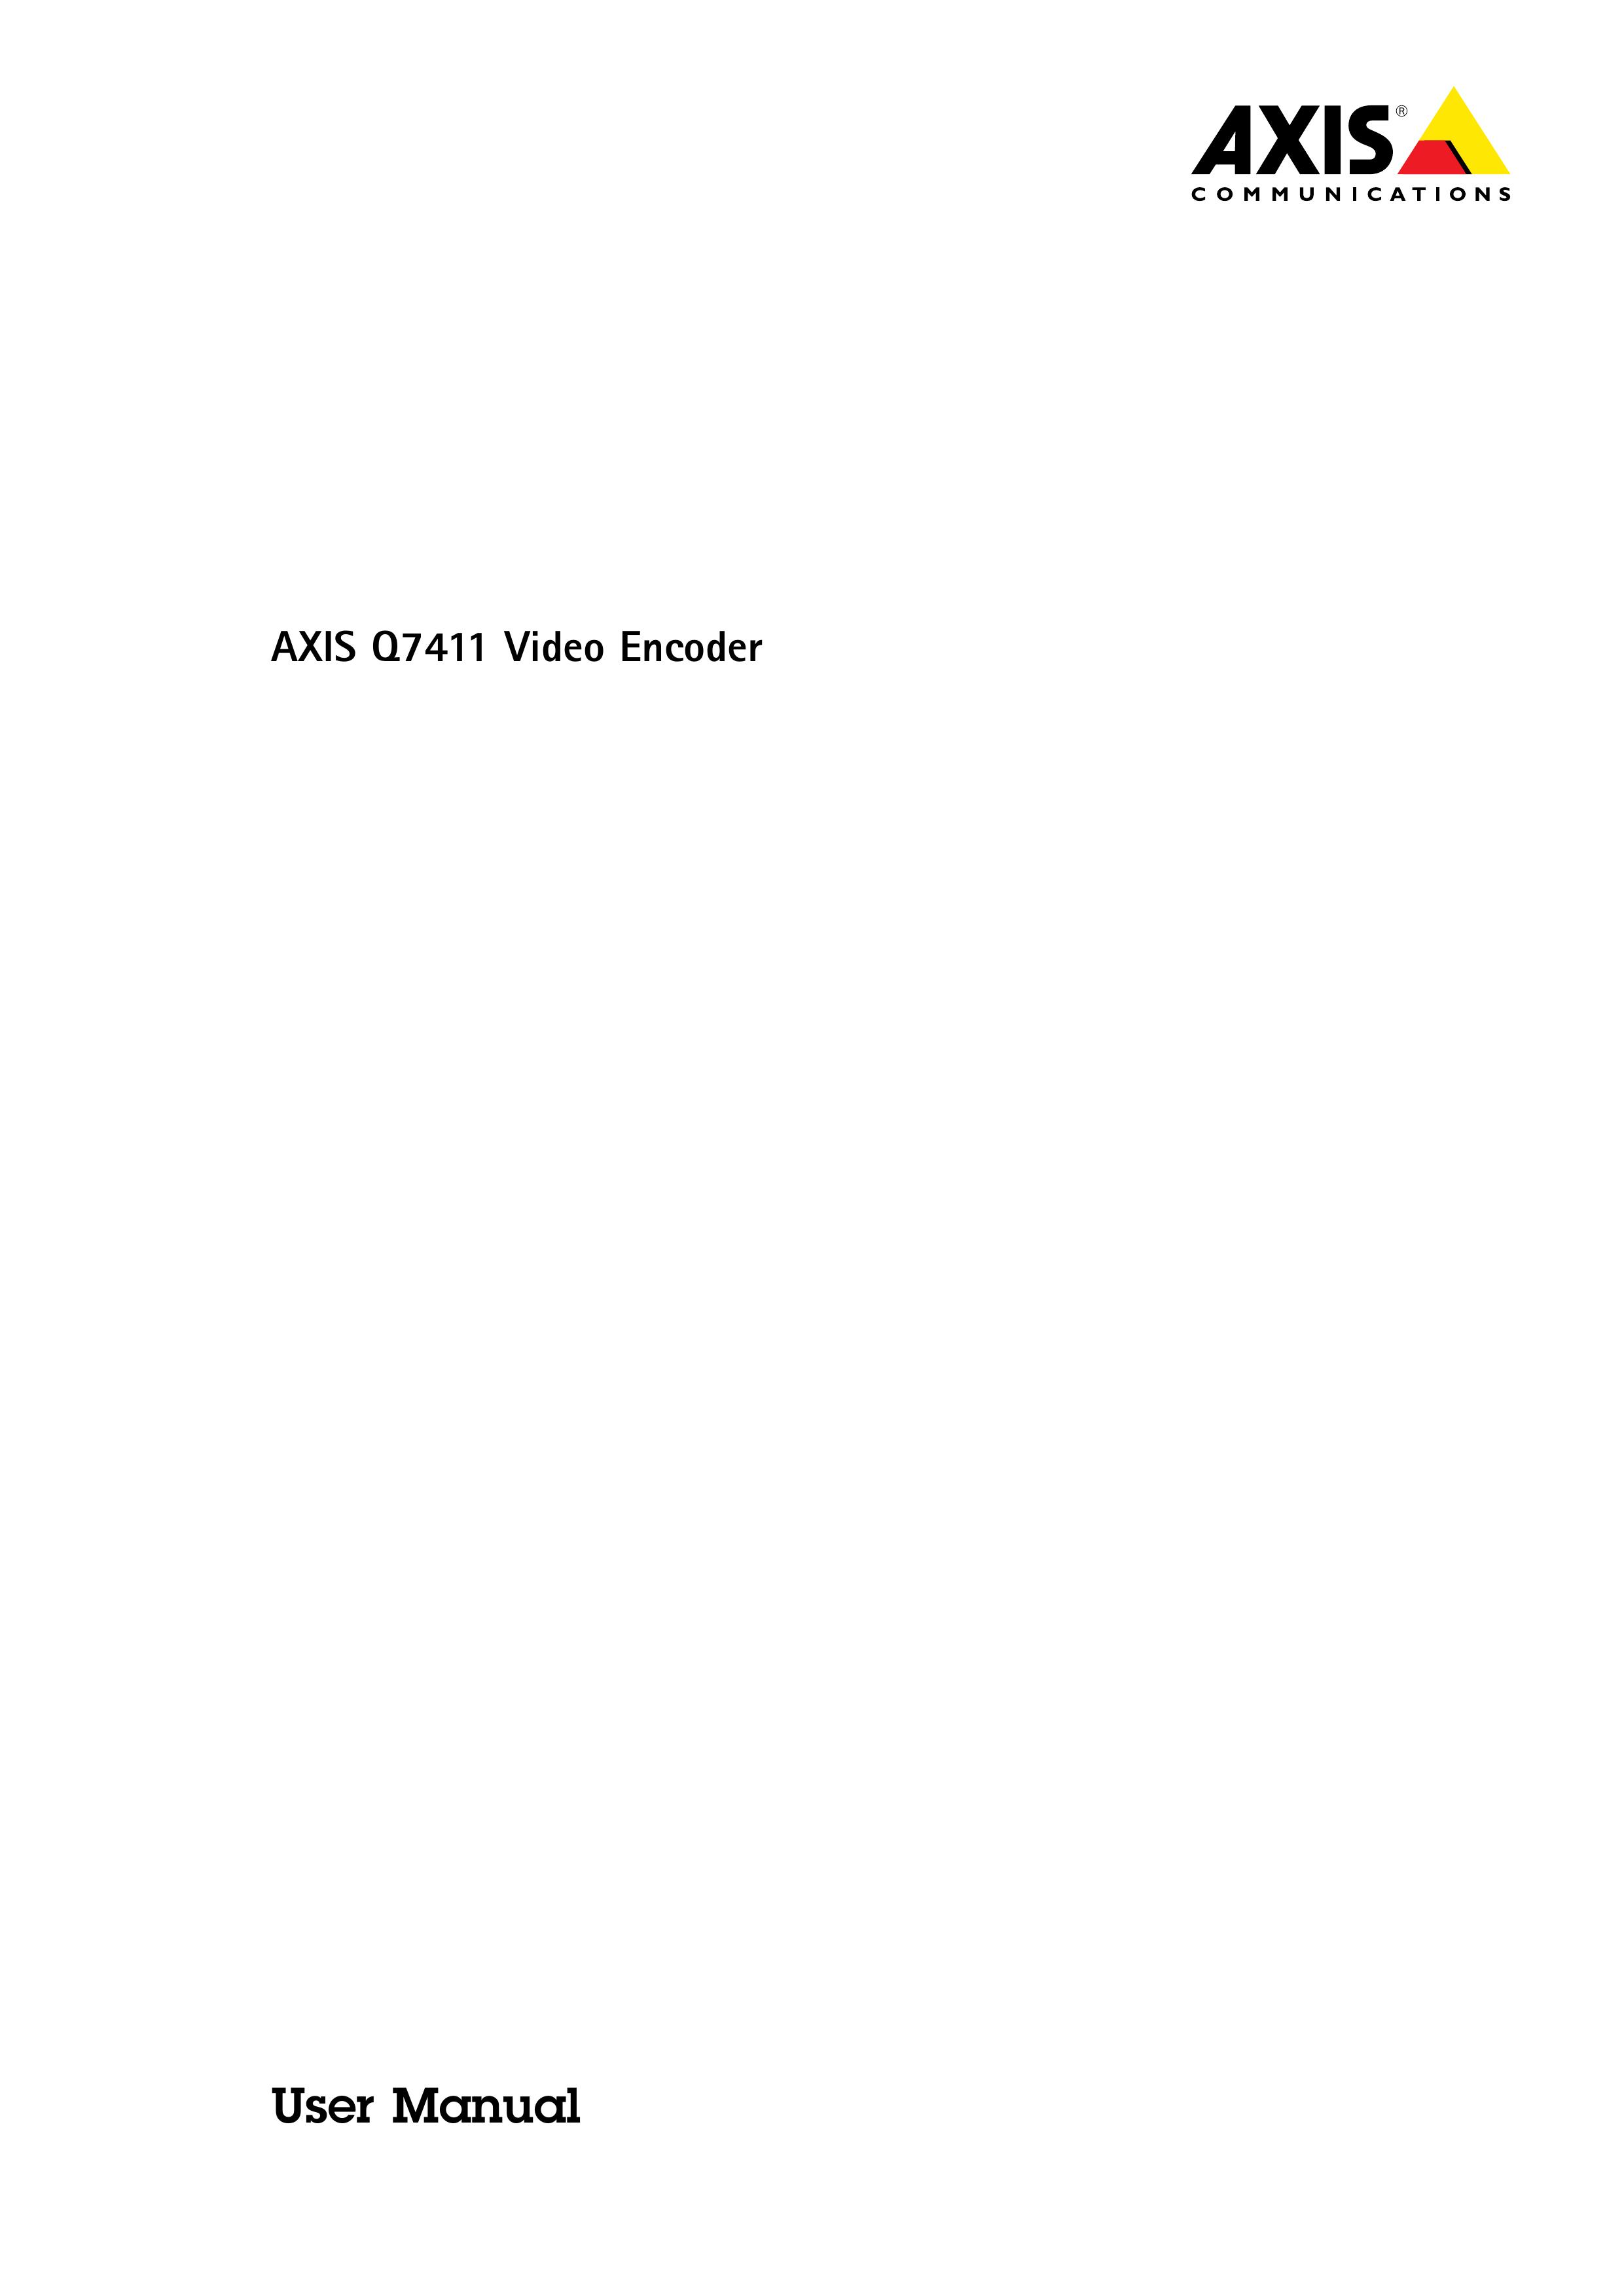 Axis Communications Q7411 Camera Accessories User Manual